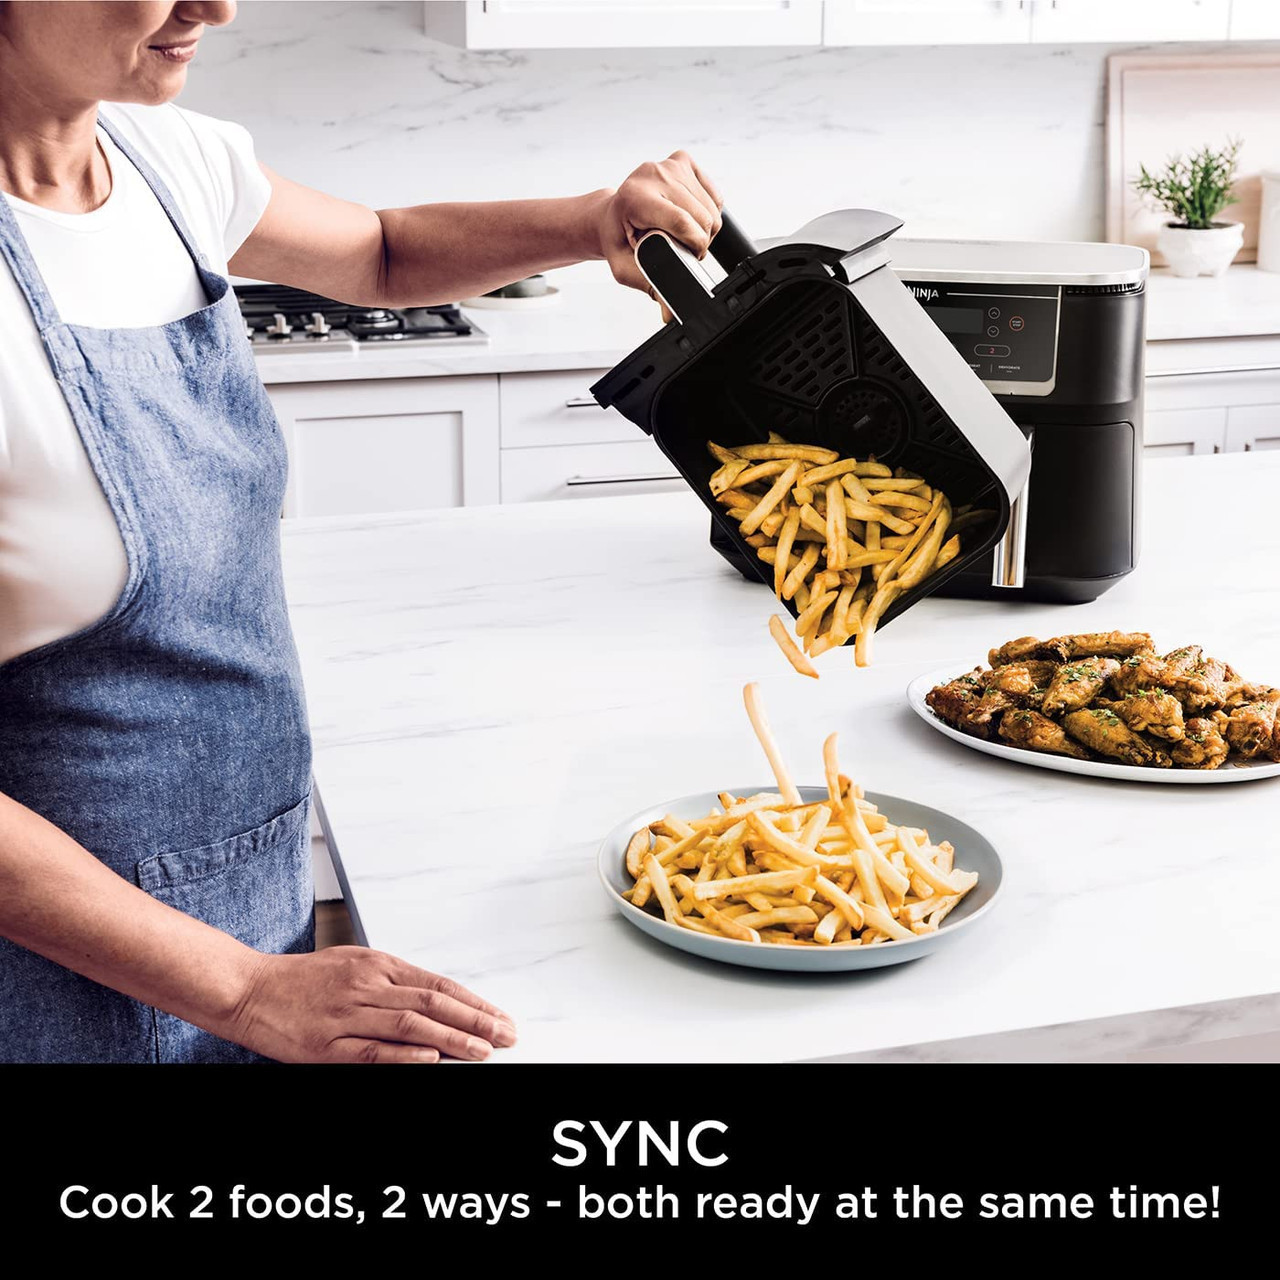 https://cdn11.bigcommerce.com/s-8ek7z3h3jn/images/stencil/1280x1280/products/8716/47554/ninja-foodi-max-dual-zone-air-fryer-with-smart-cook-system-or-af451uk__85038.1681526660.jpg?c=1?imbypass=on